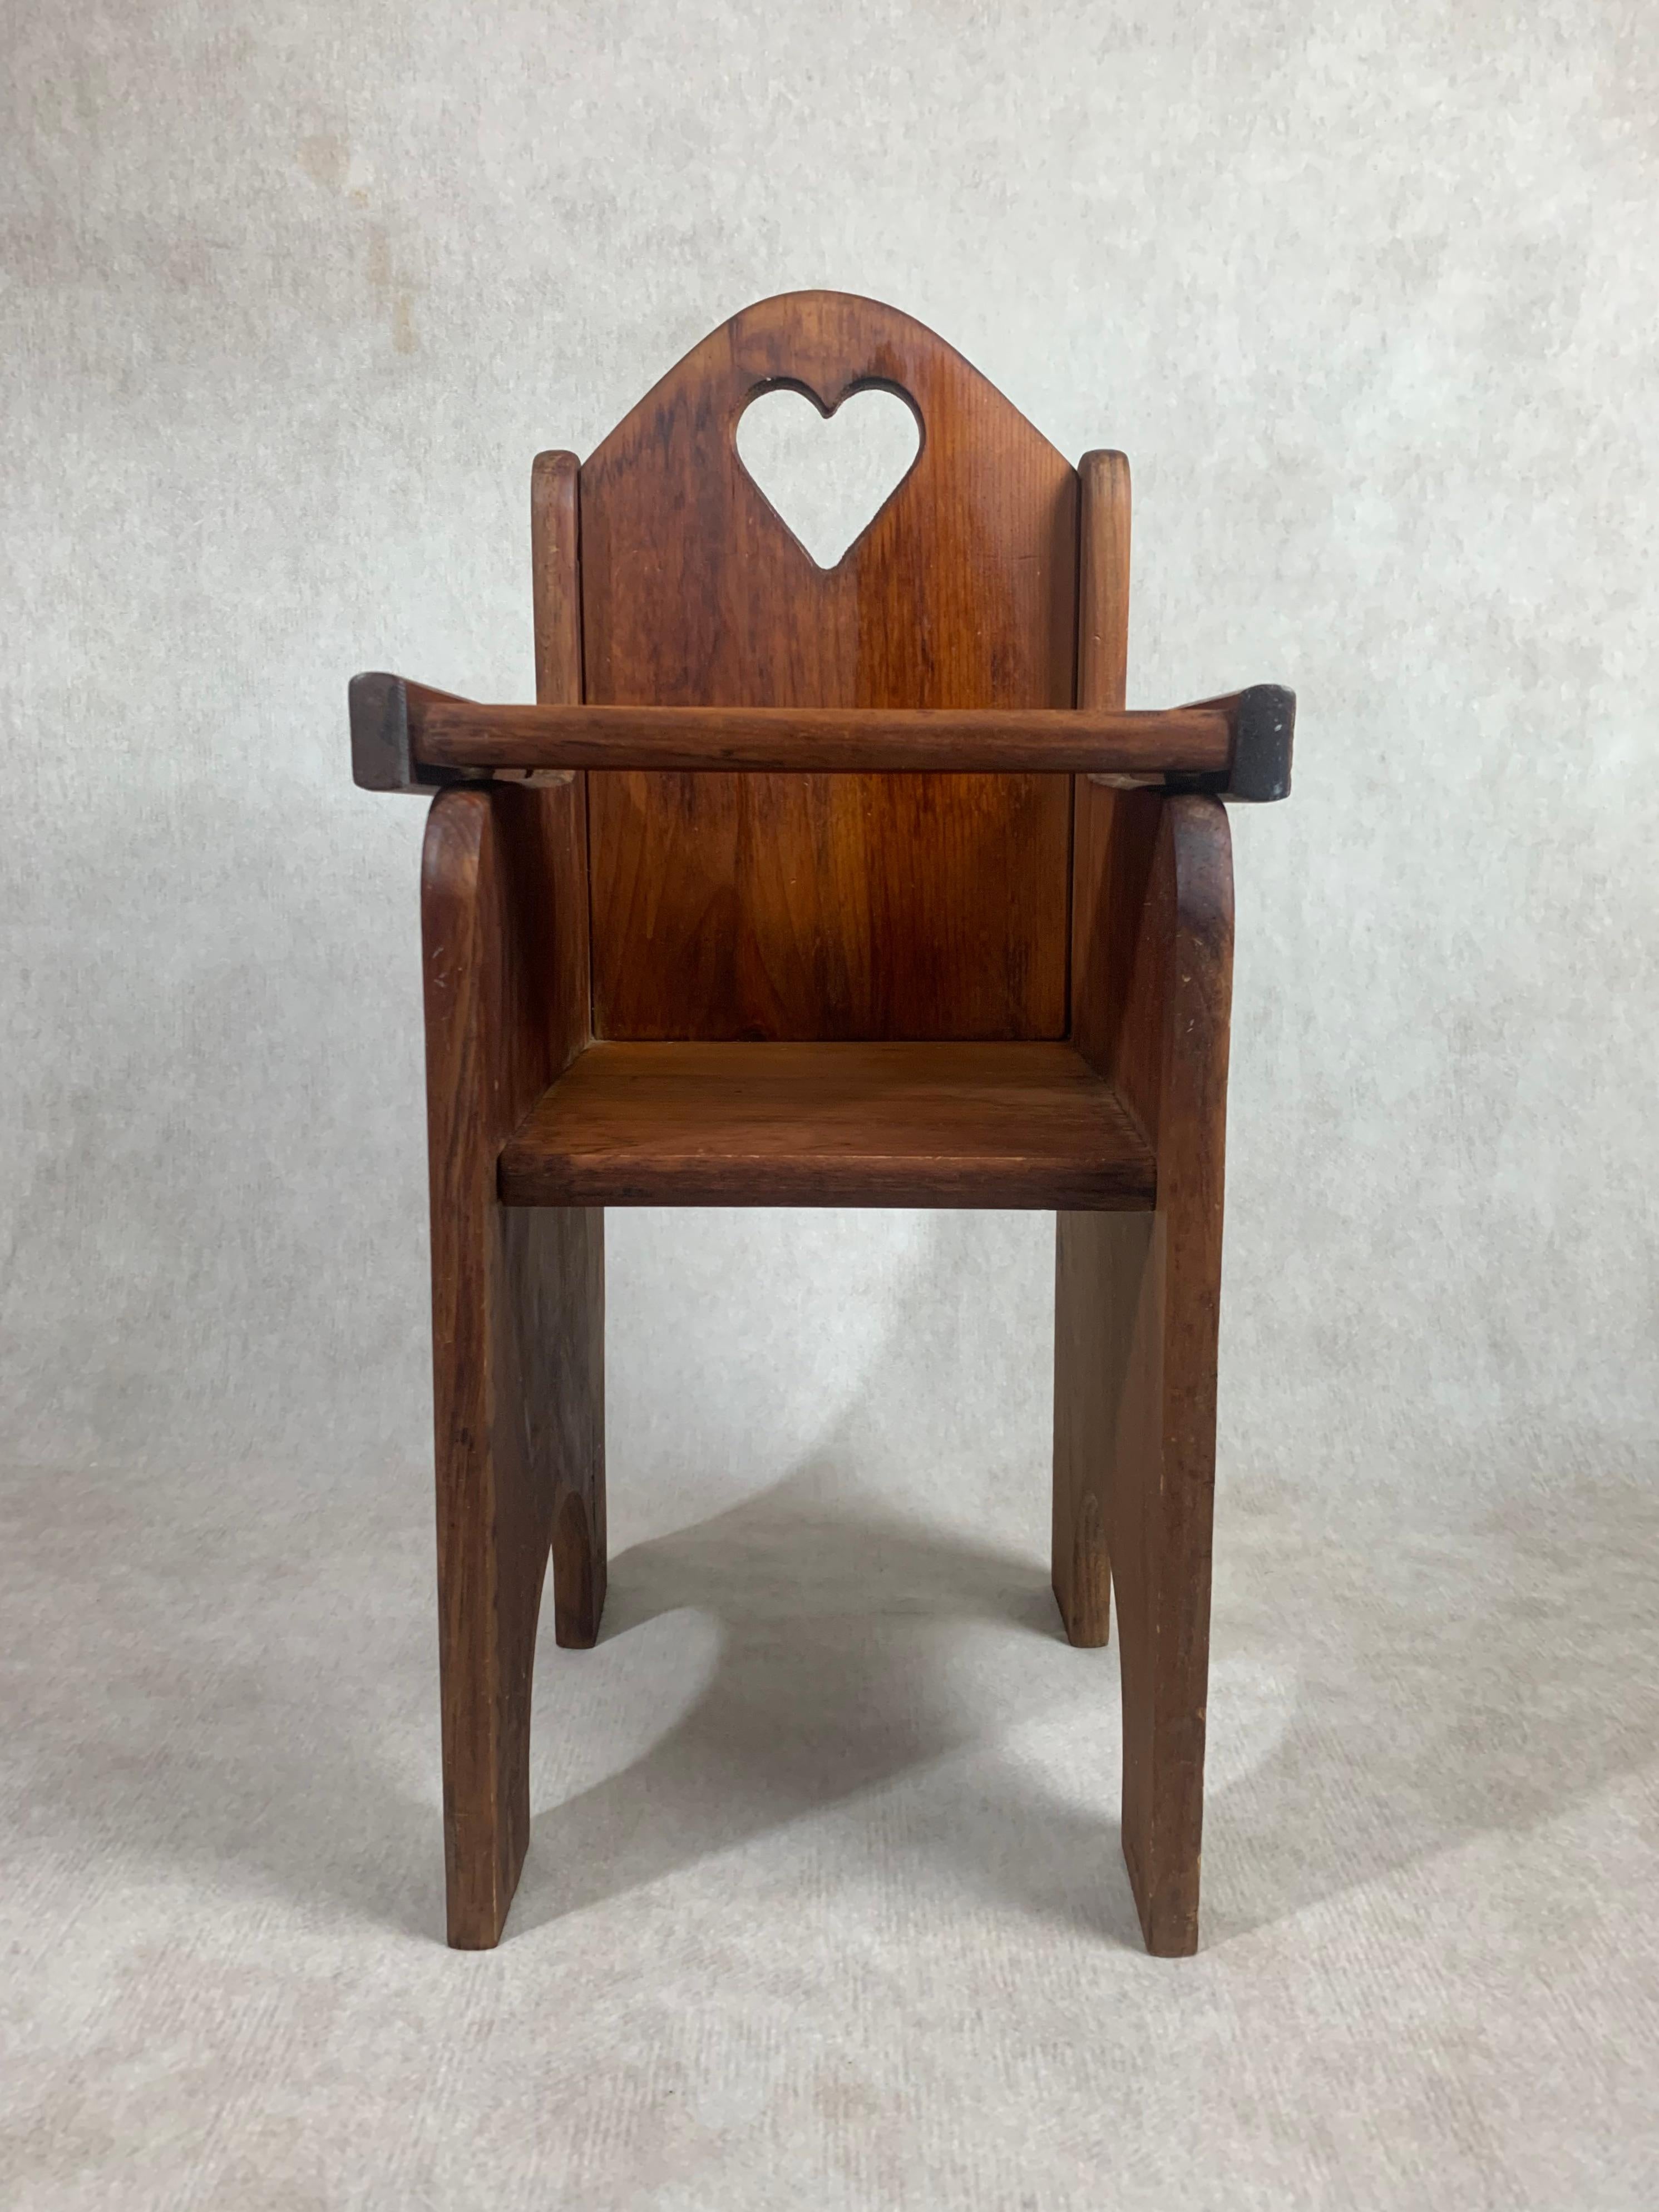 Heirloom quality solid wood doll highchair handmade in Lancaster, PA circa 1940 of native pine.  Tray moves easily upon raising and lowering. Legs are sturdy and presents beautifully overall. Only minor scratches observed commensurate with age and